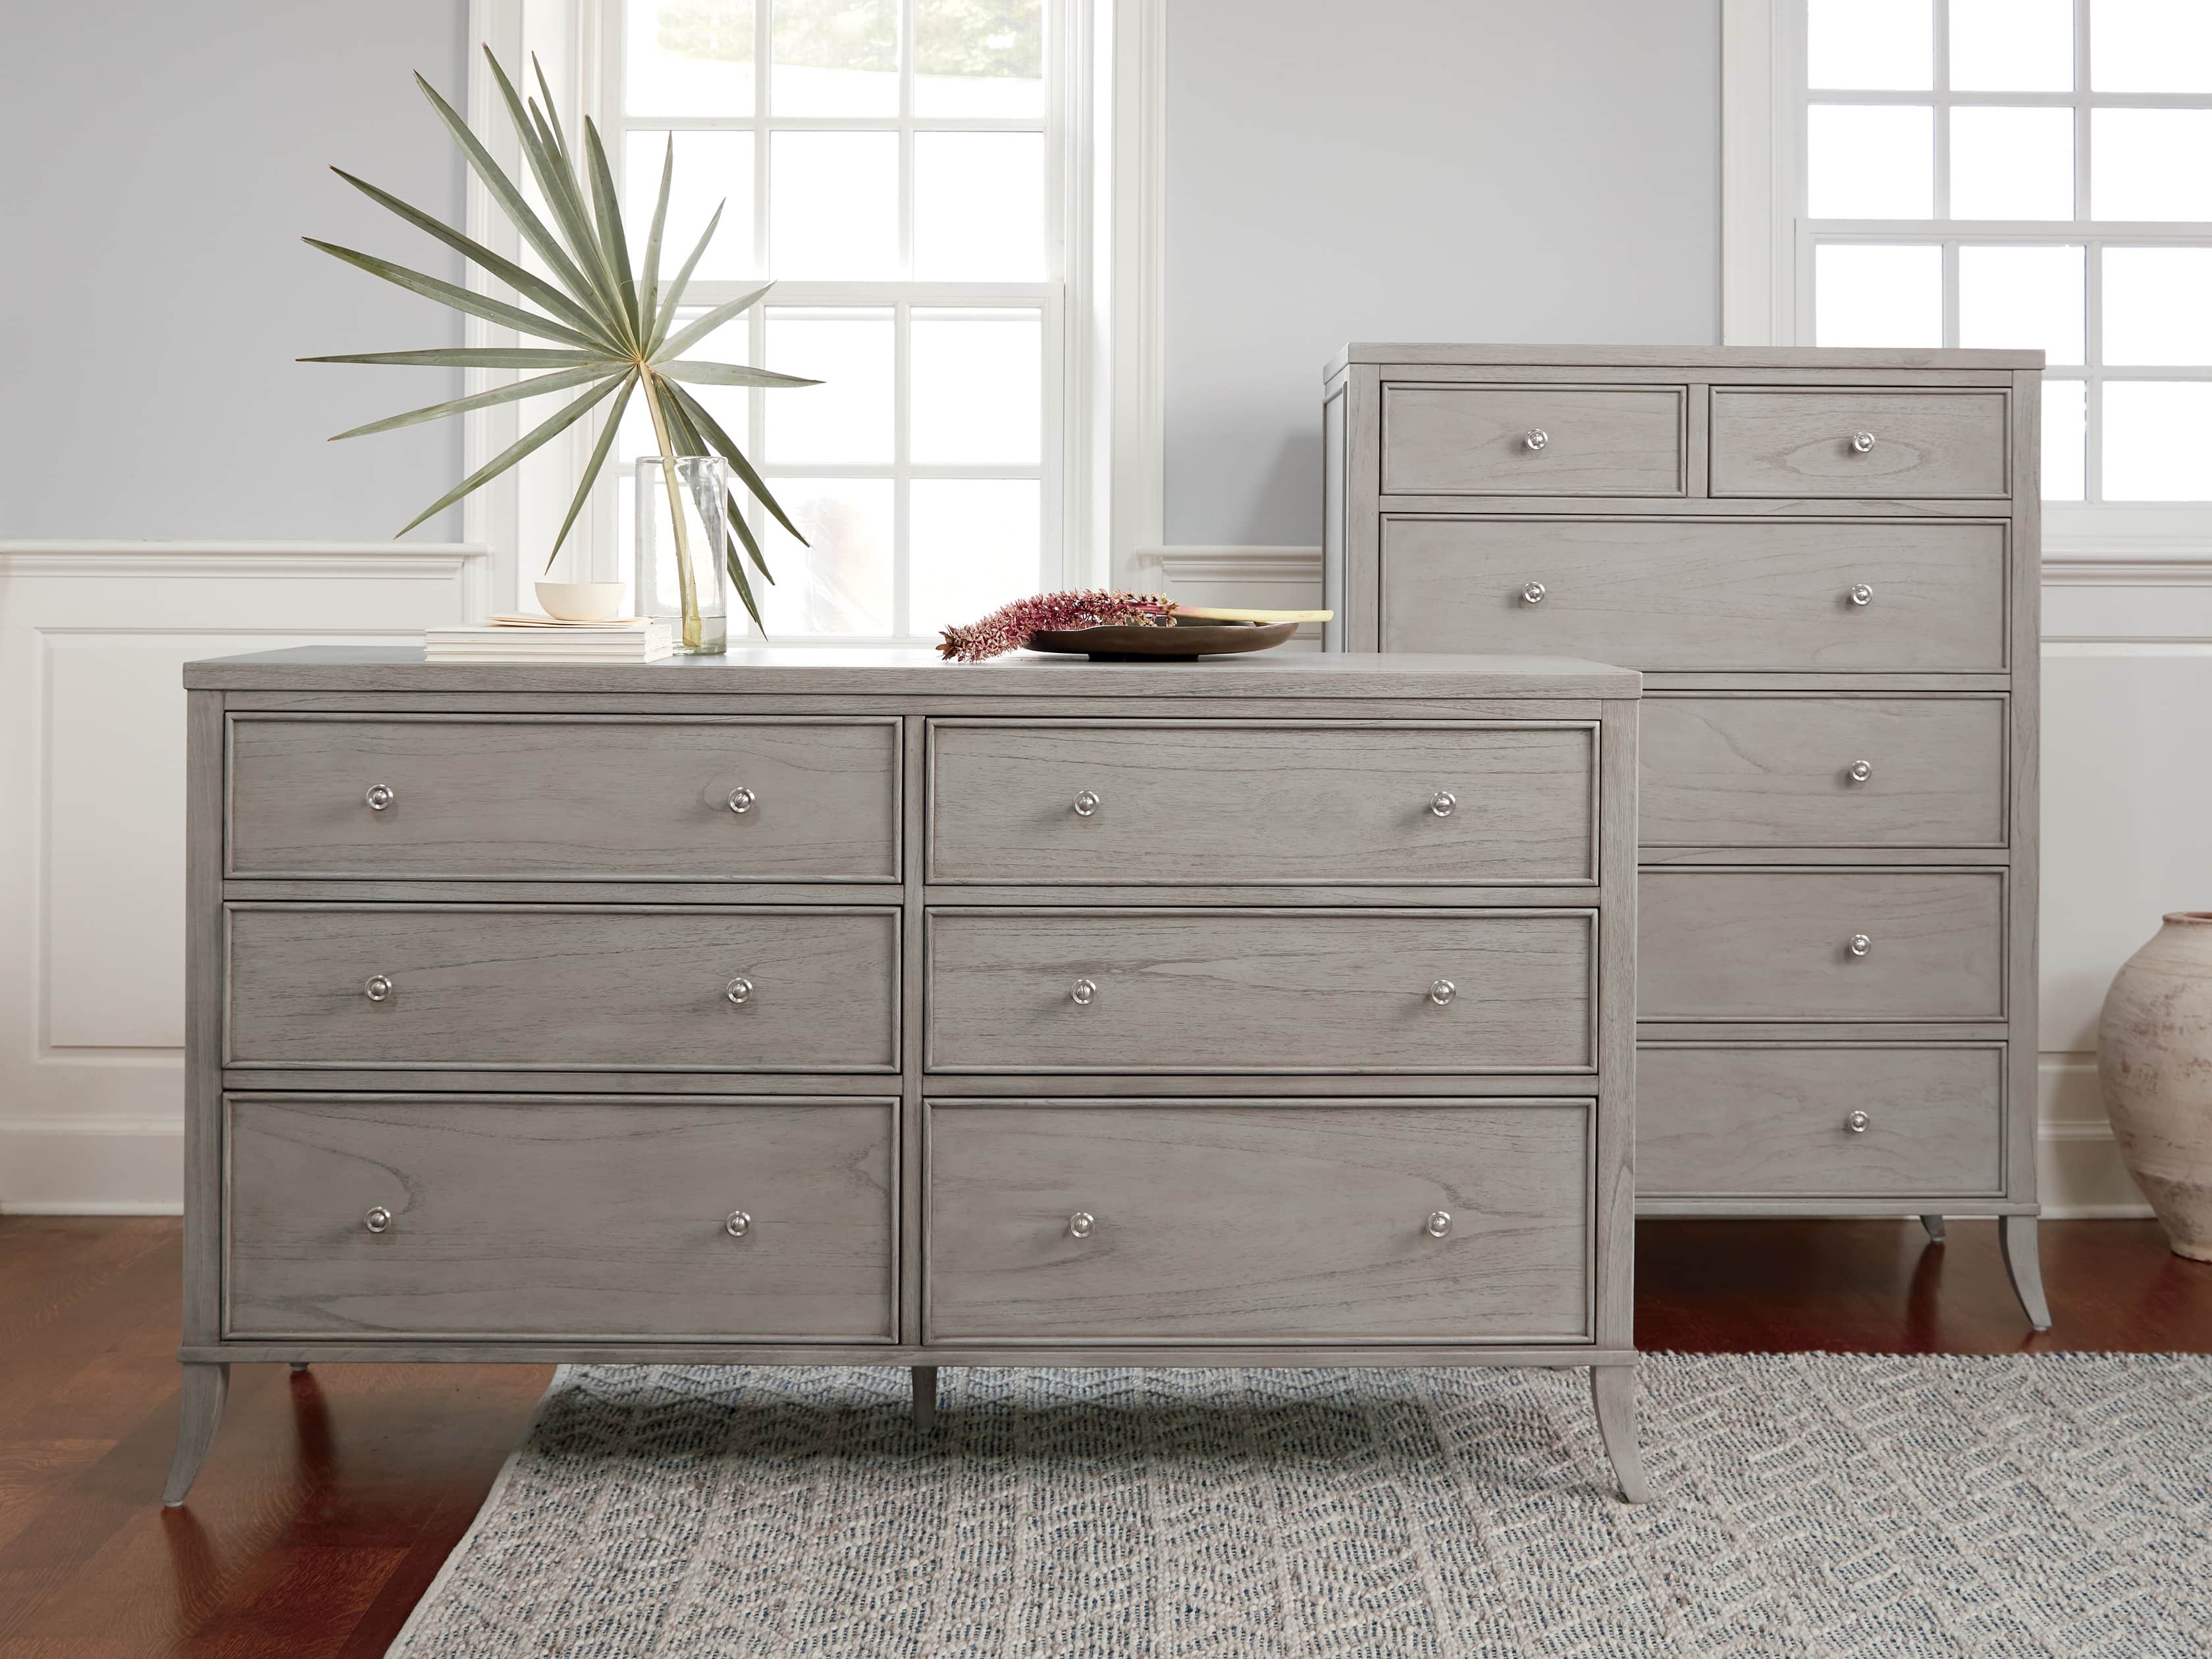 Bedroom Dressers And Lingerie Chests Arhaus Furniture